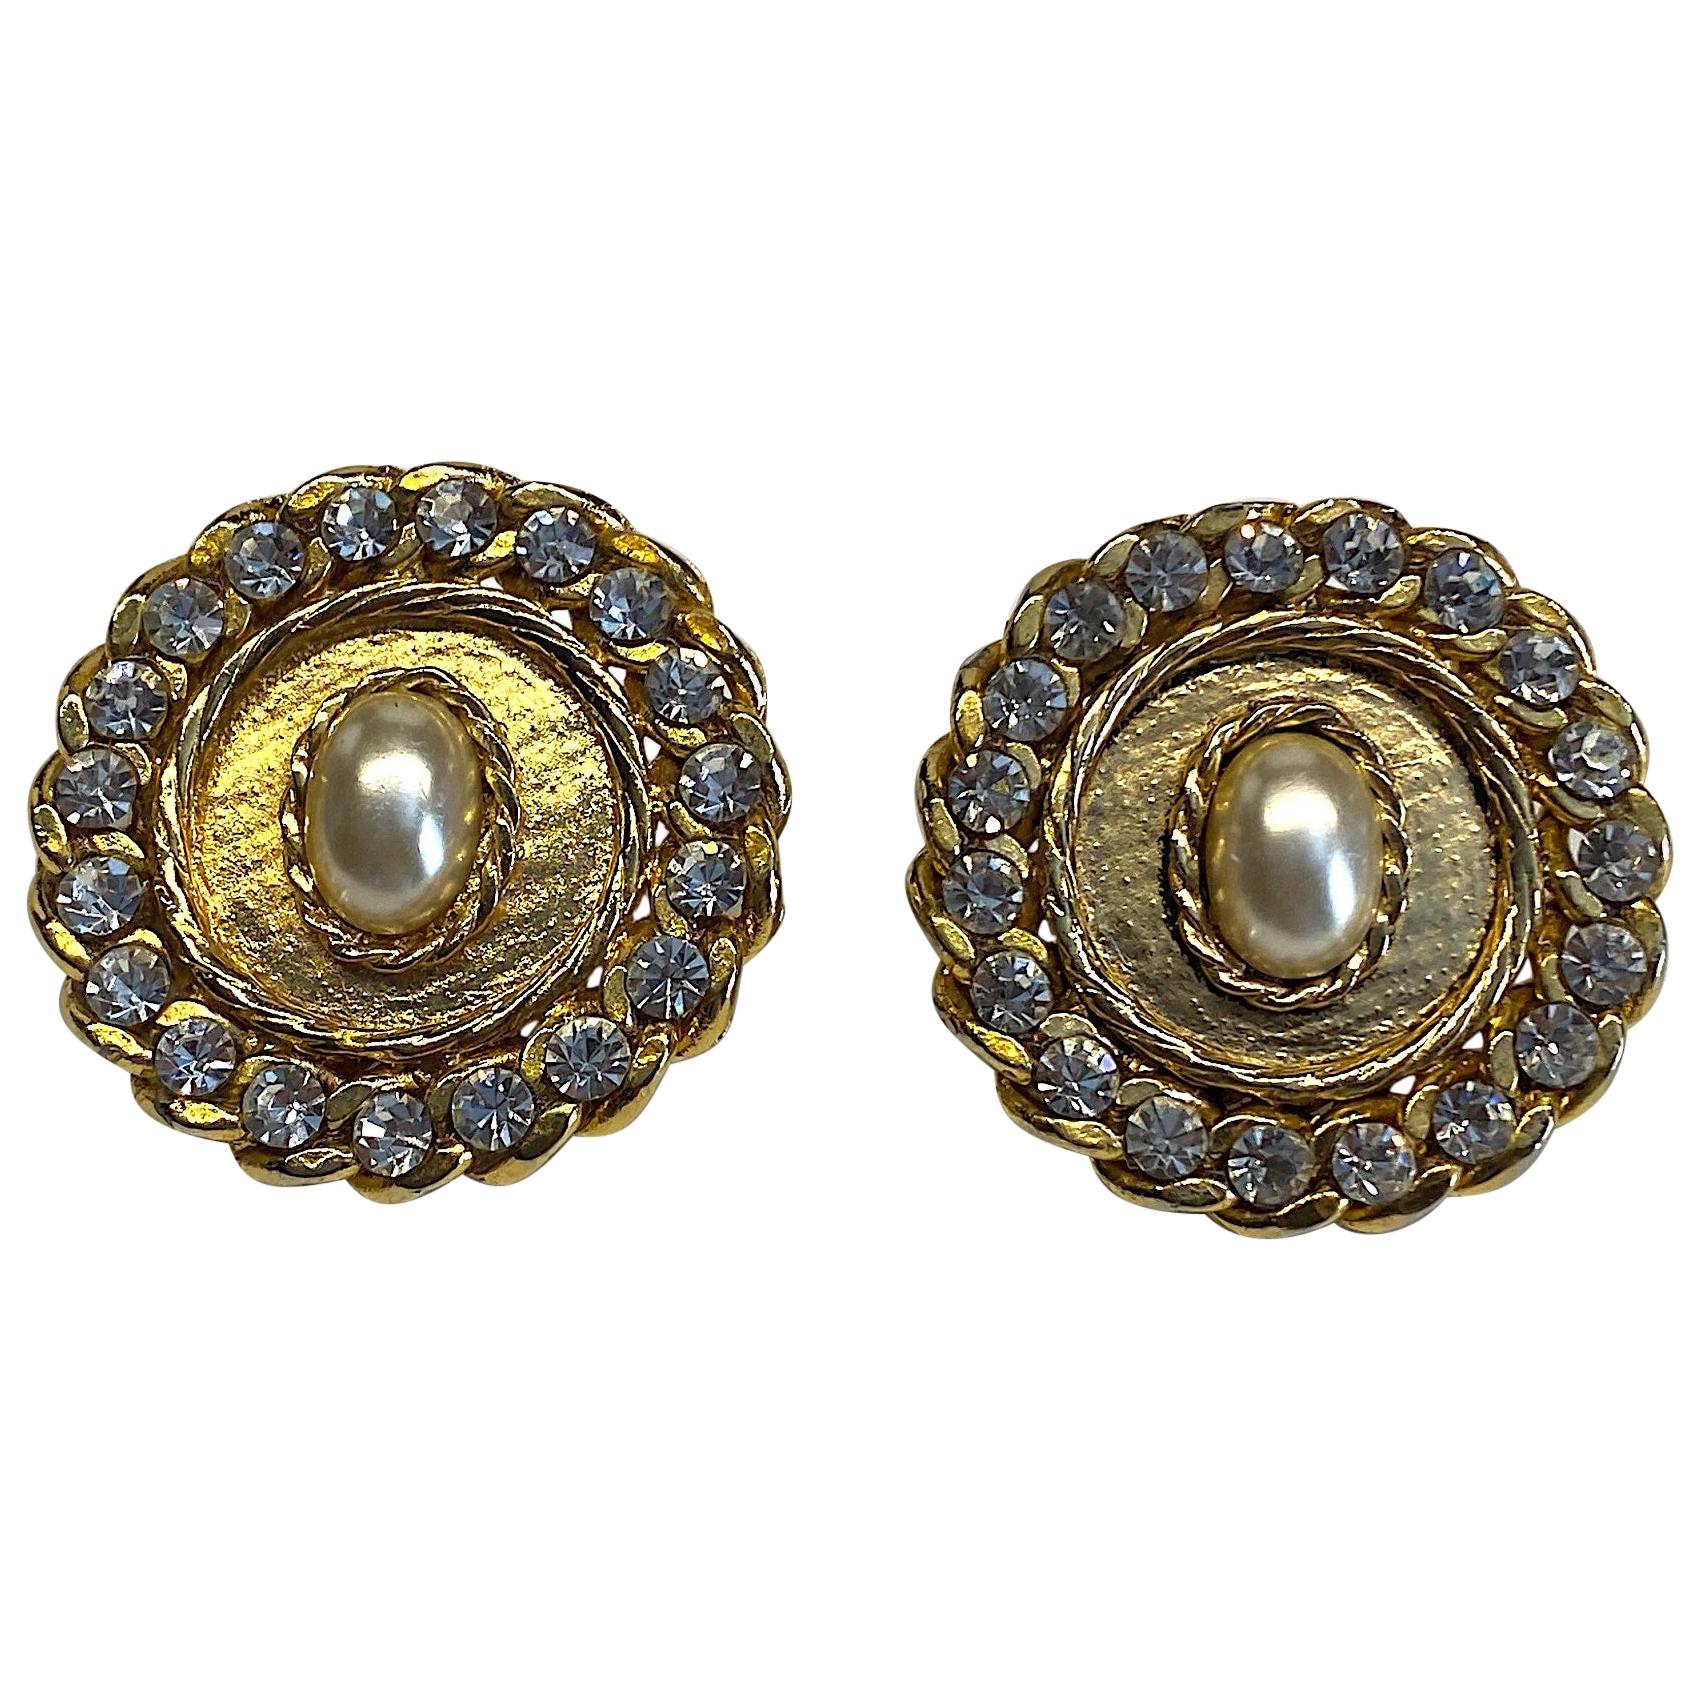 1980s Gold, Rhinestone and Pearl Curb Link Button Earrings